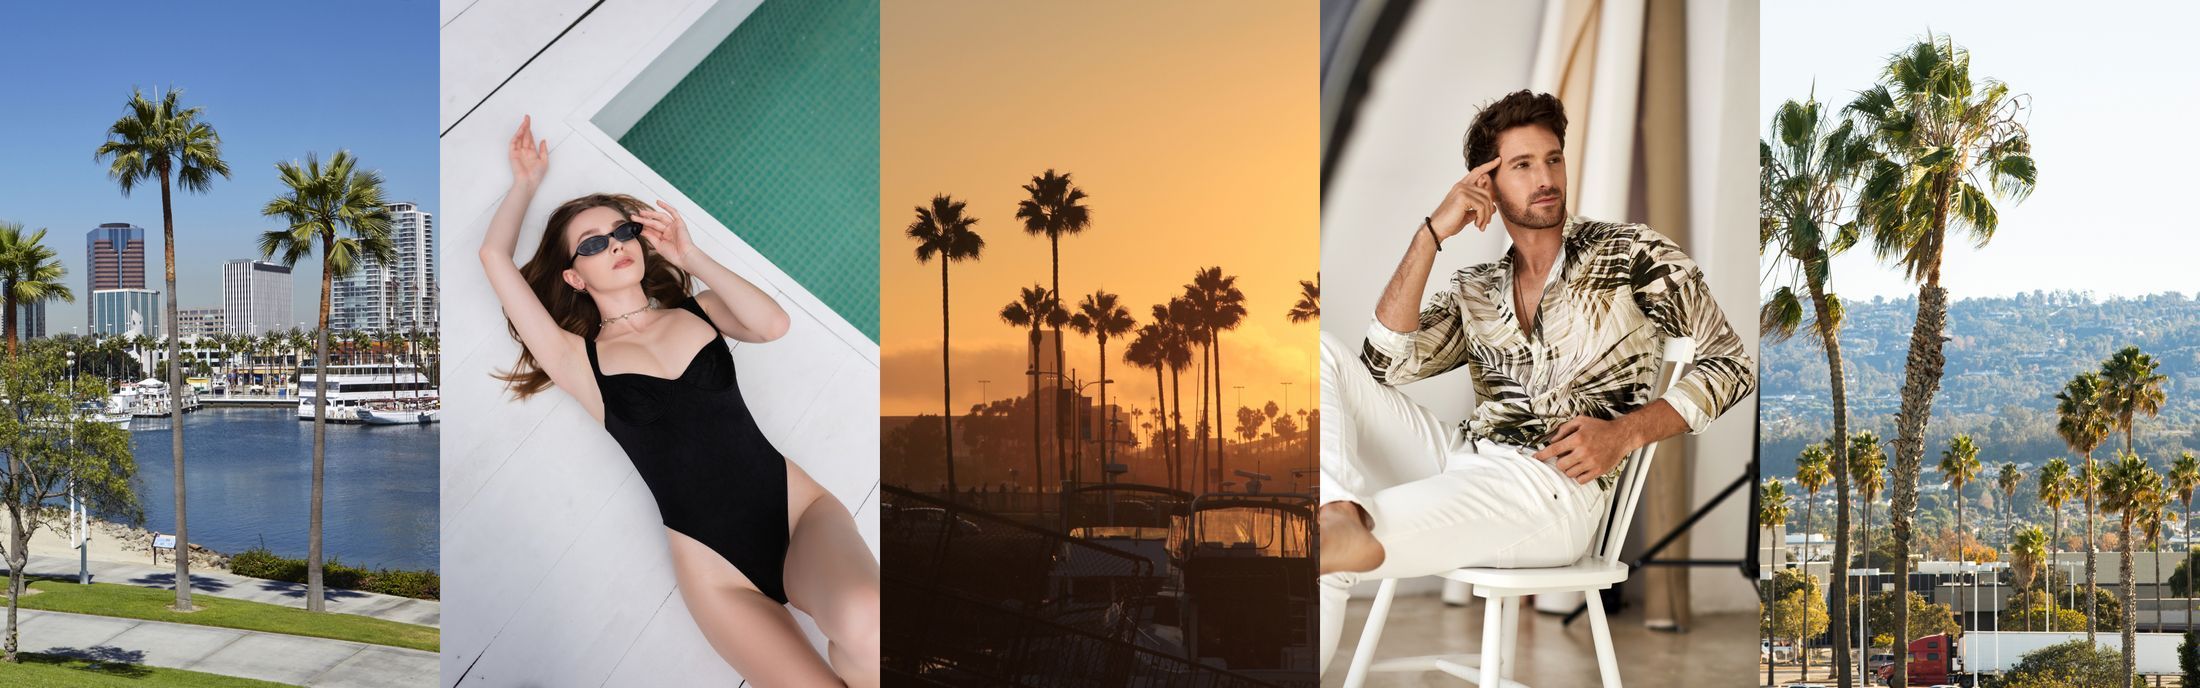 collage of picturesque views with palm trees, a woman laying next to a pool and a man sitting in a white chair, as if enjoying a premier experience at a South Bay med spa